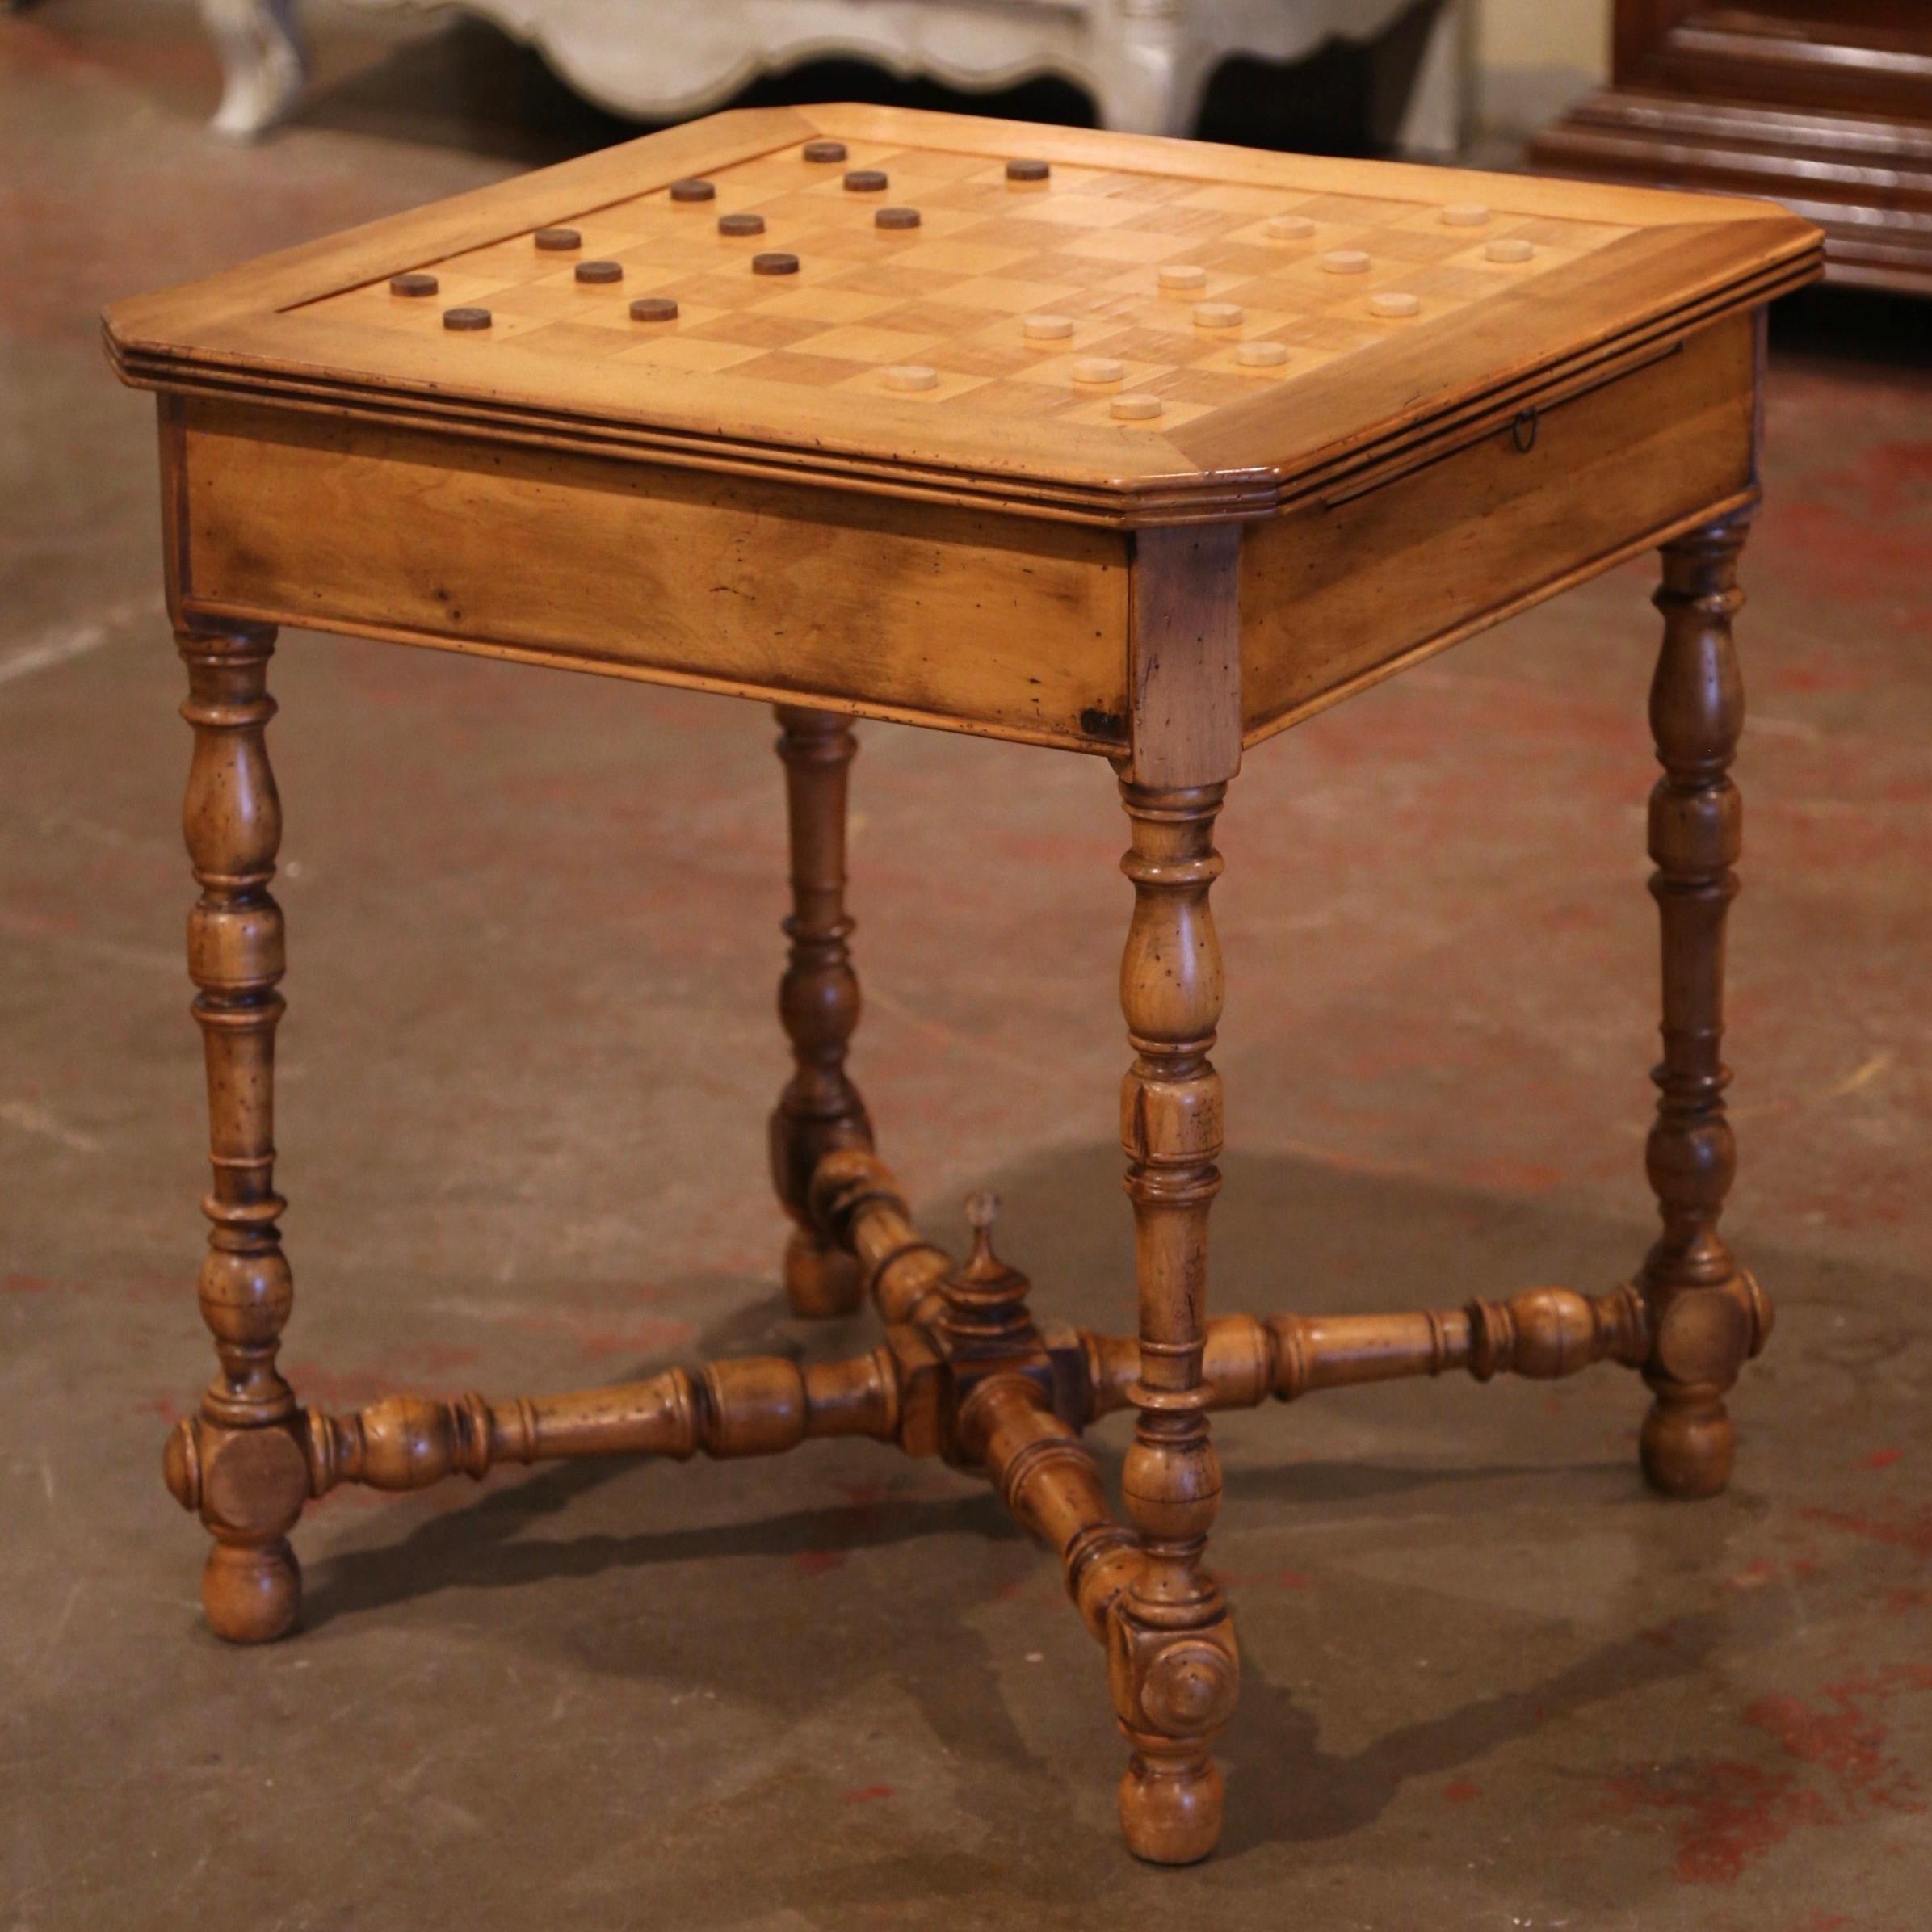 Crafted in southern France circa 1870, the antique game table stands on four elegant turned legs connected with a bottom X-stretcher embellished with a central finial. The multi function surface features a chess or checker board on one side and a